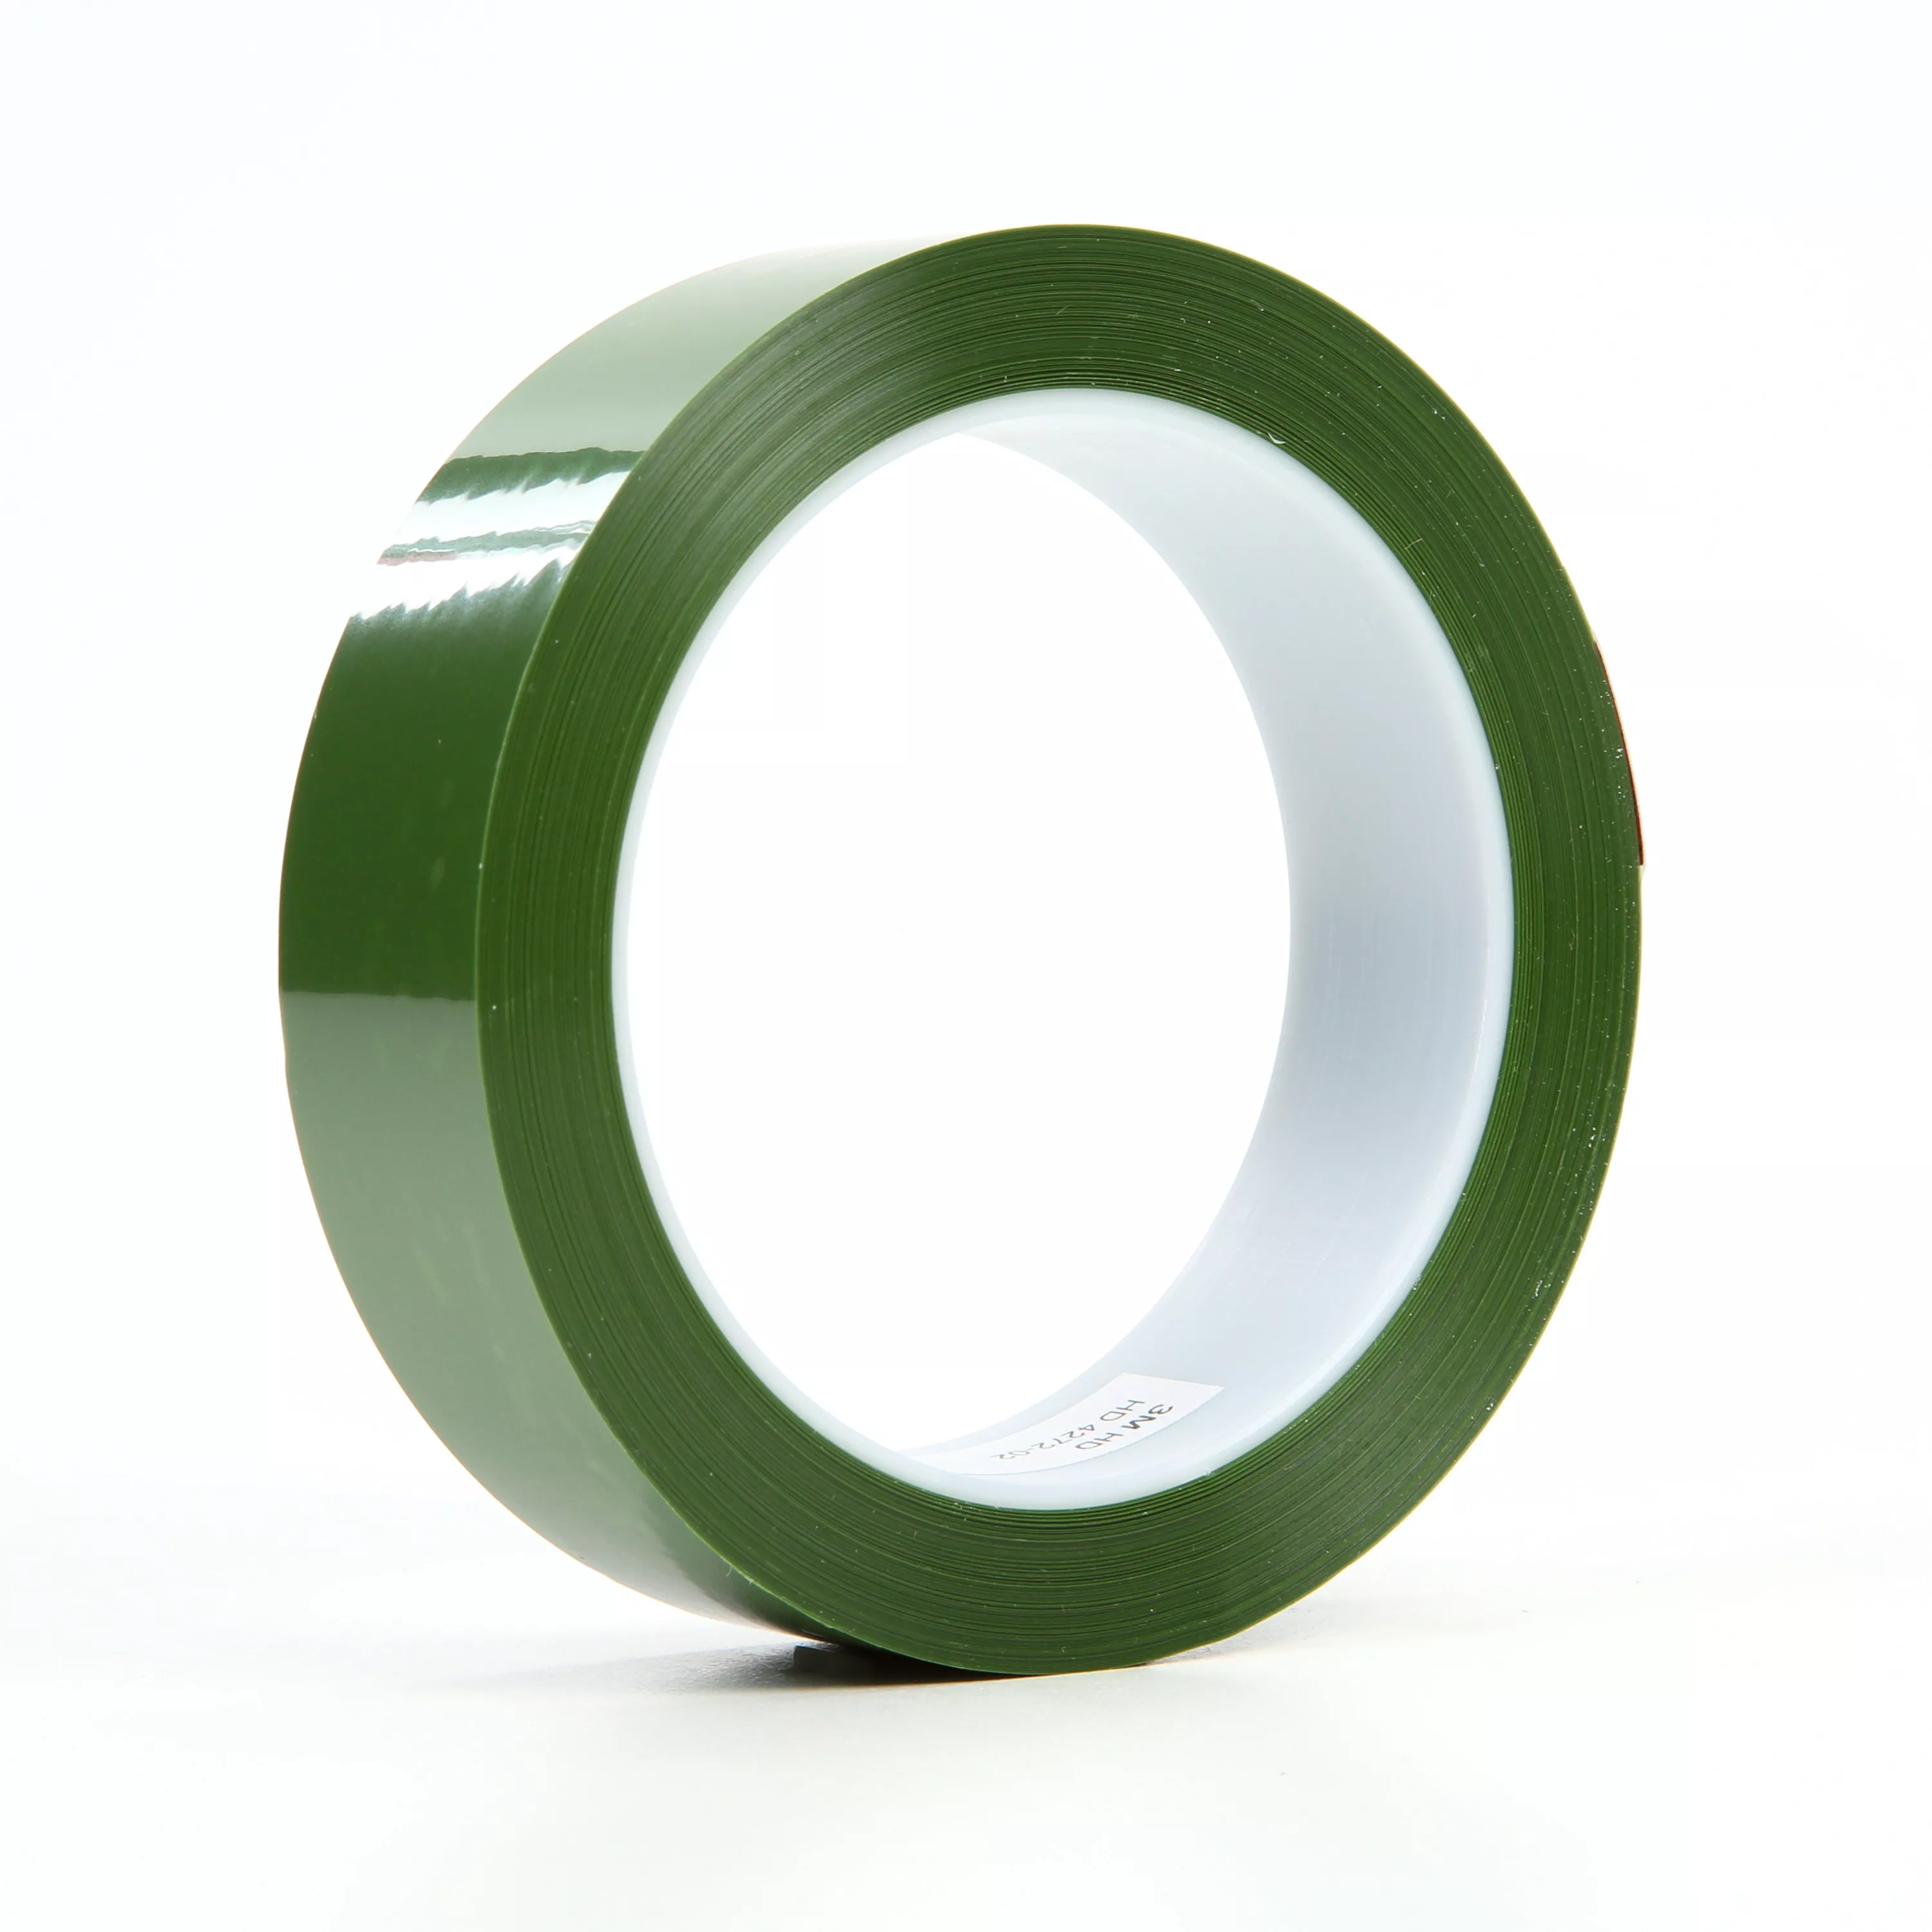 3M™ Polyester Tape 8402, Green, 1.9 mil, 1 in x 72 yd, 36 Roll/Case